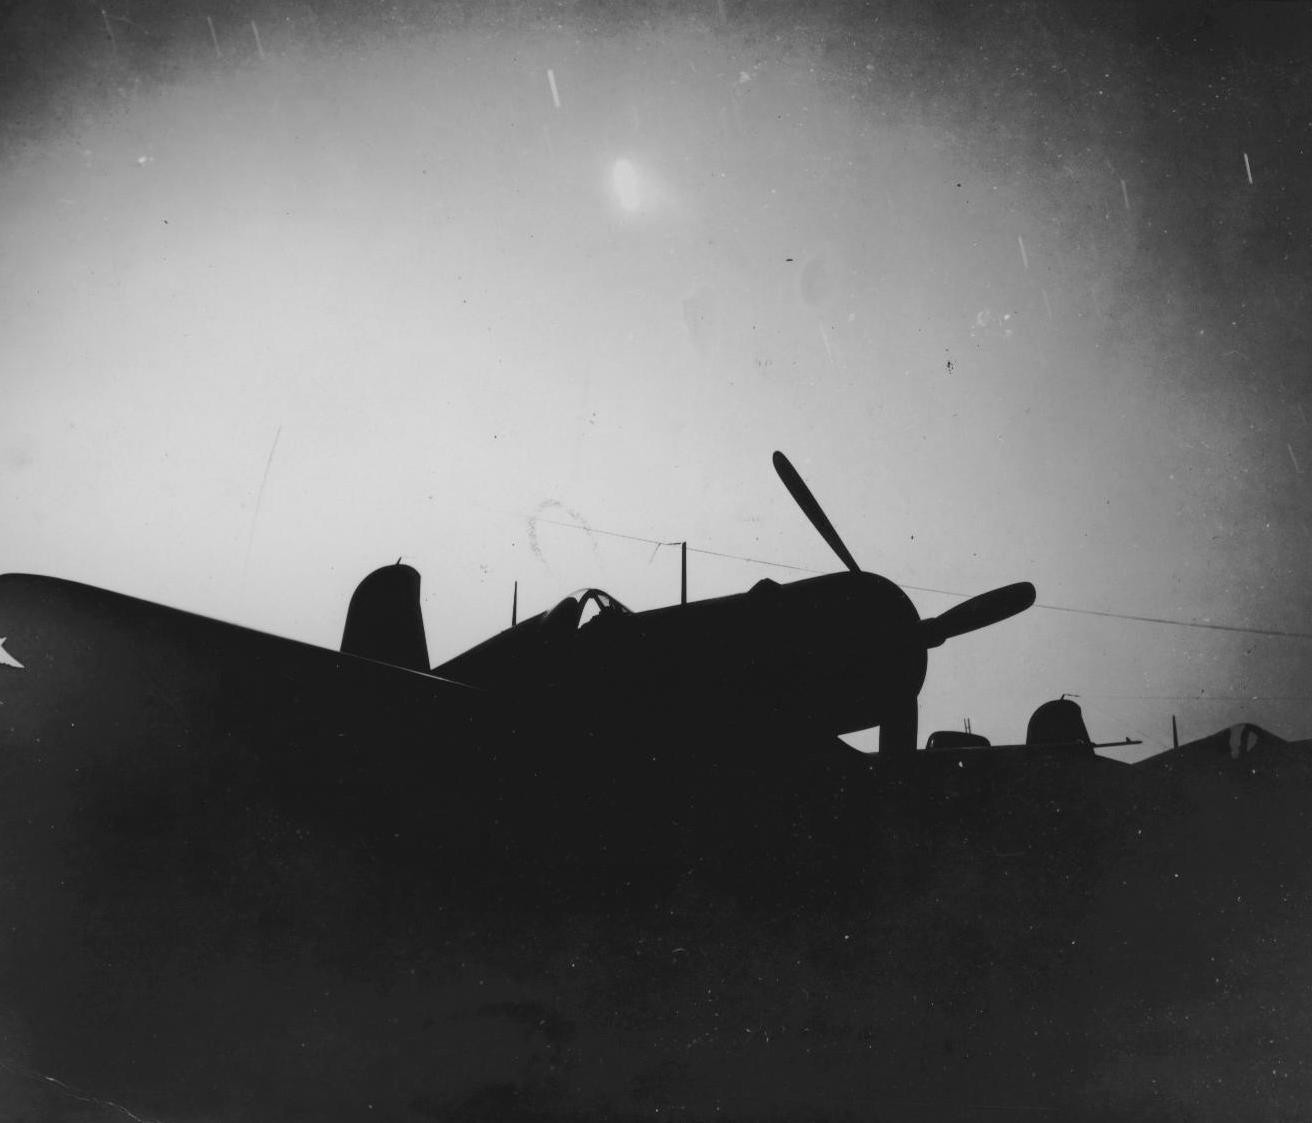 Silhouette of a USMC Corsair fighter seen against a burning supply dump, Yontan Airfield, Okinawa, Japan, Apr 1945